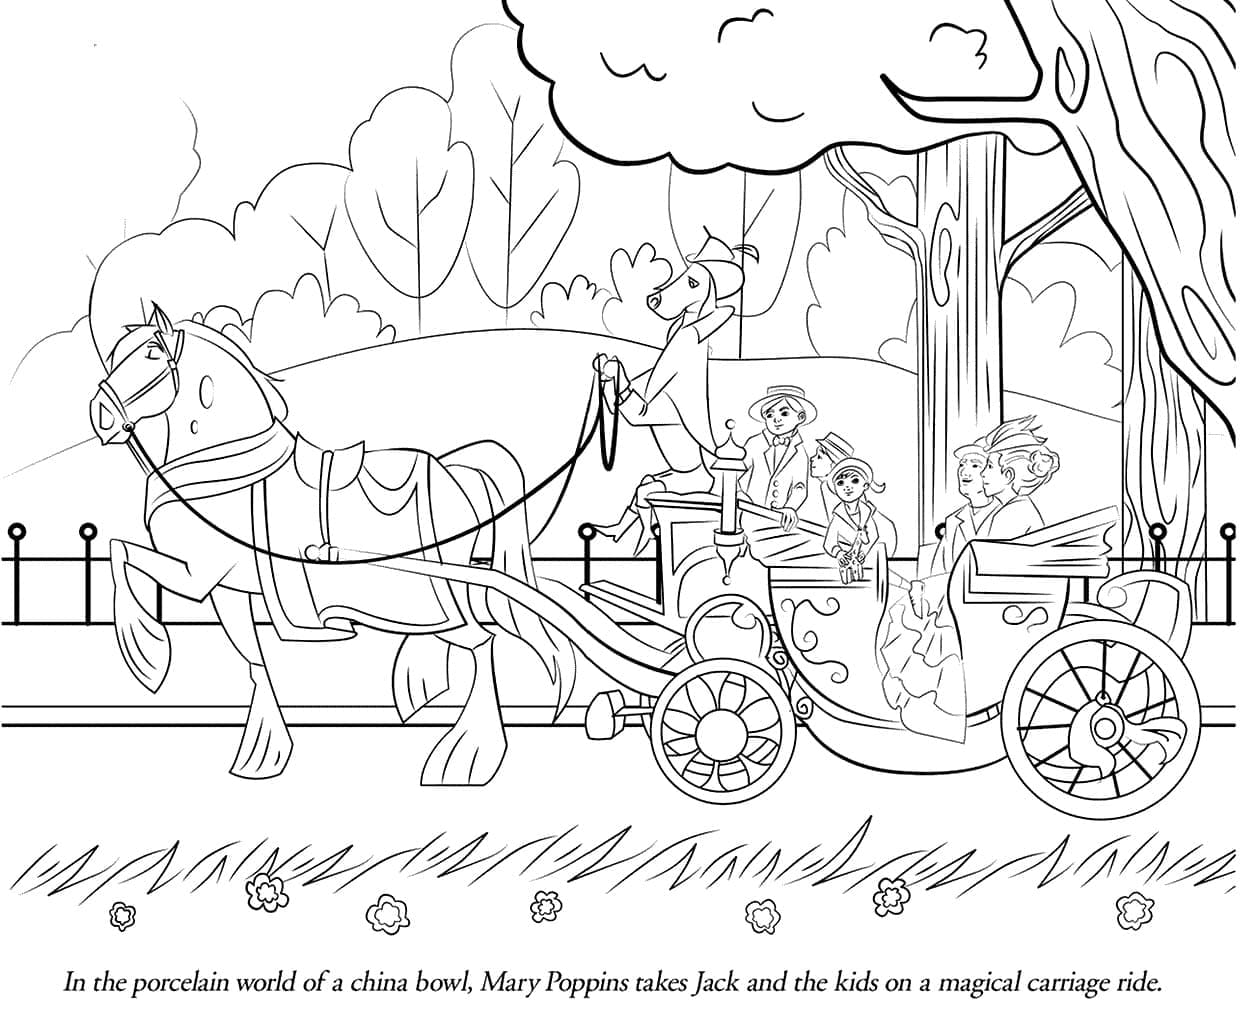 Mary Poppins 2 coloring page